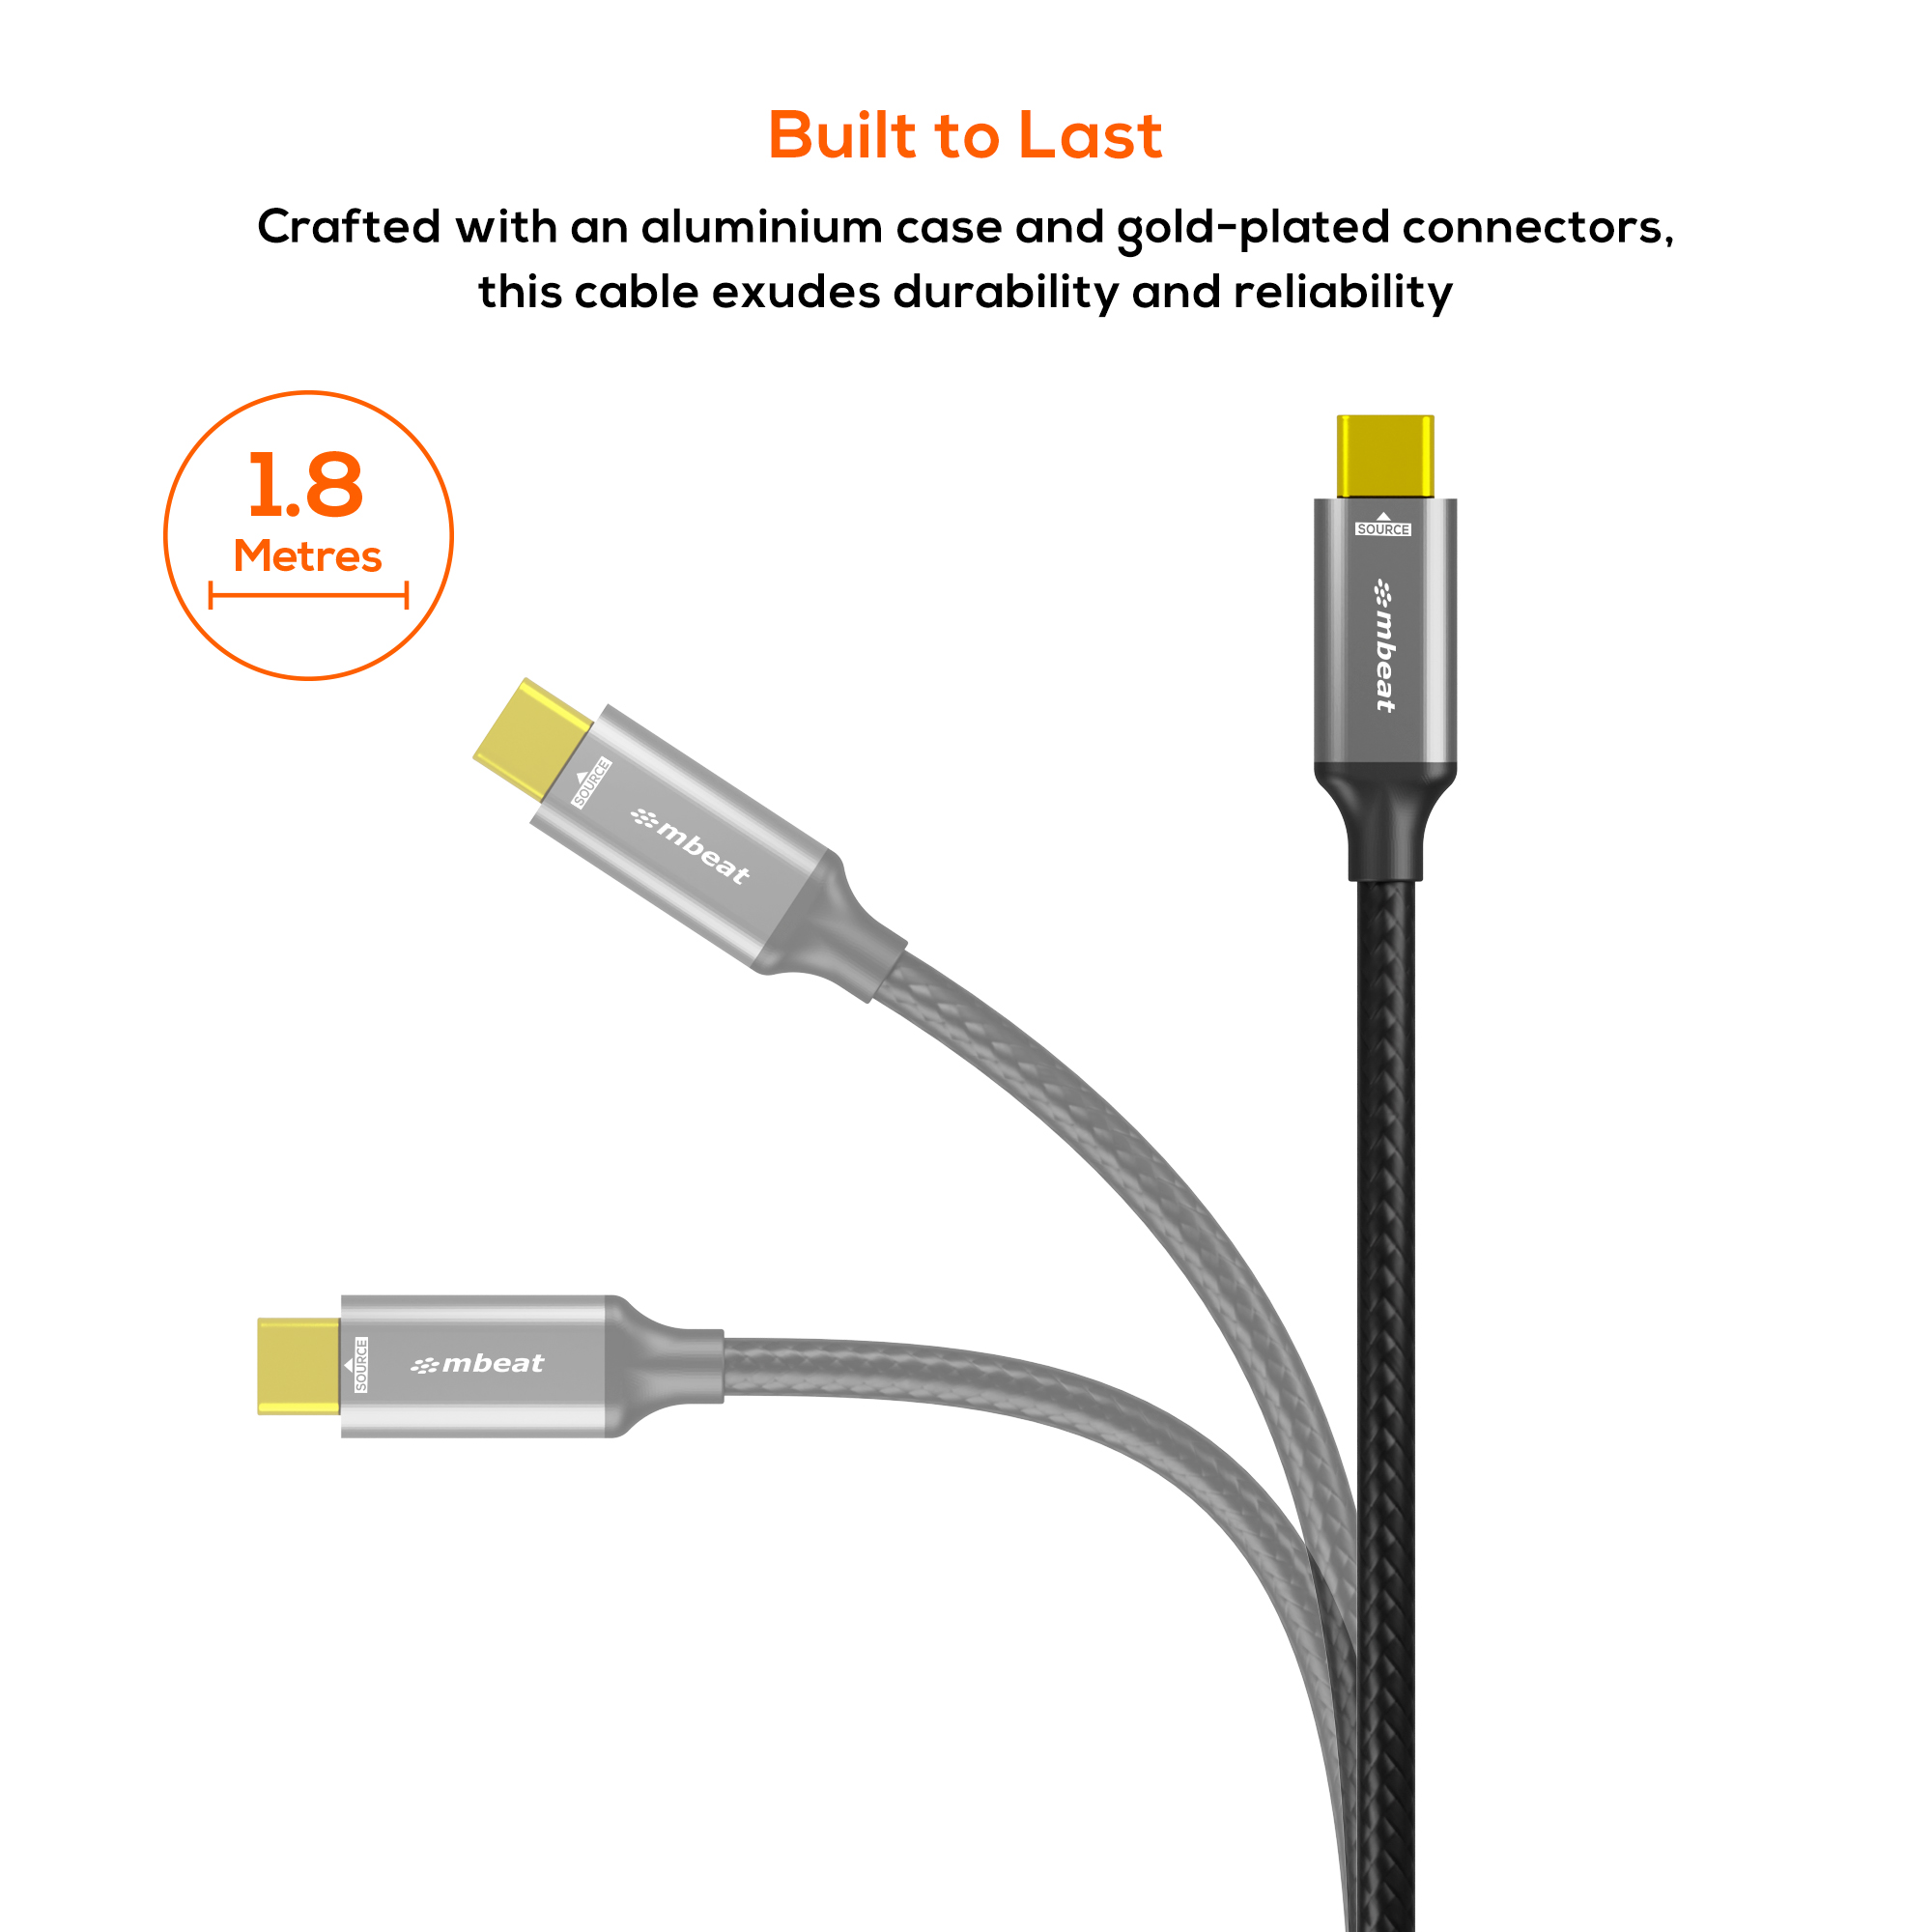 A large marketing image providing additional information about the product mbeat Tough Link 8K USB-C to HDMI Cable - 1.8m  - Additional alt info not provided